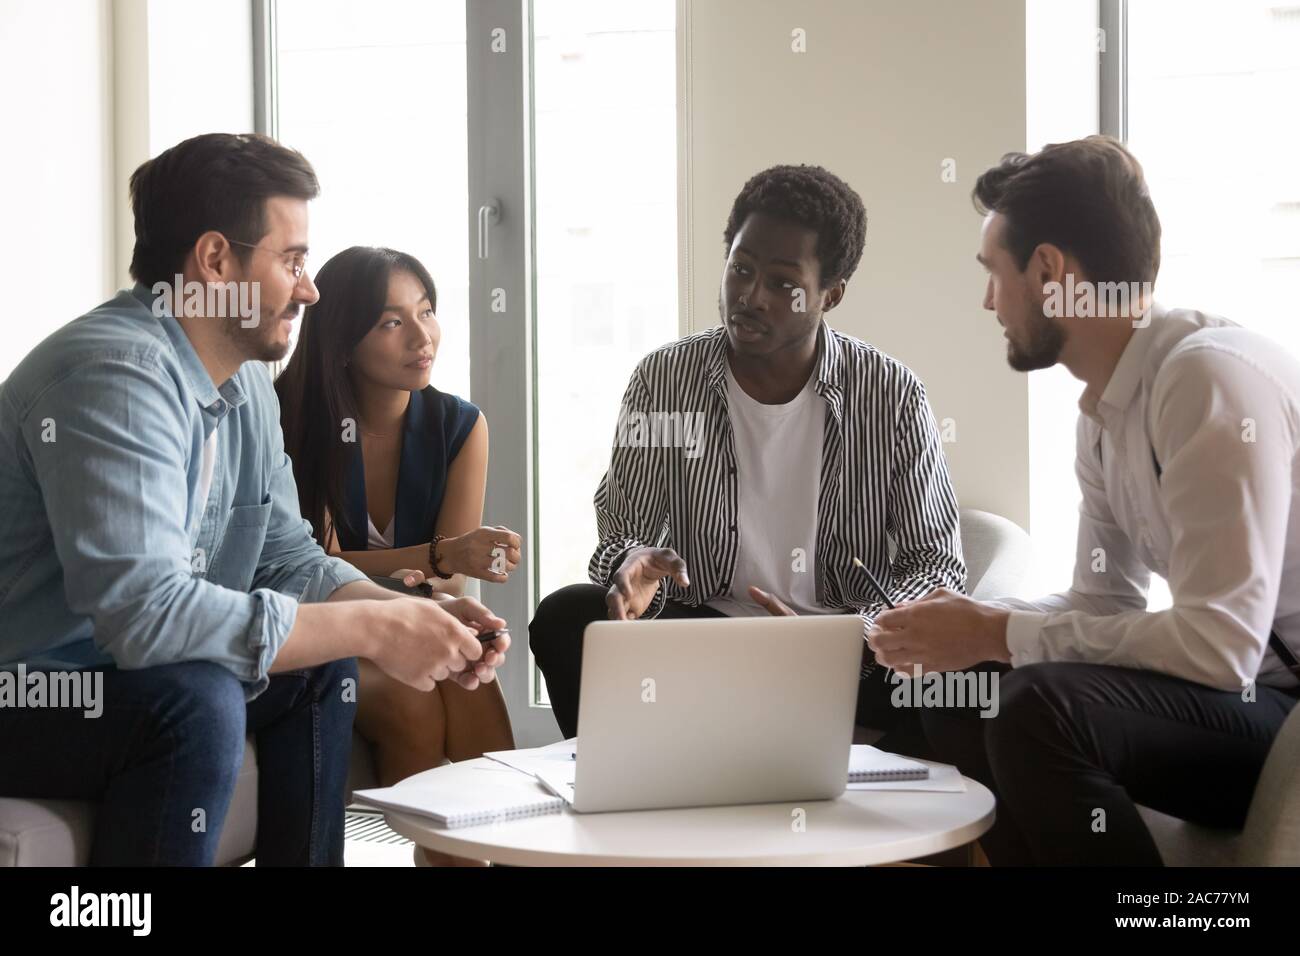 American supervisor give instructions to multiracial corporate staff Stock Photo